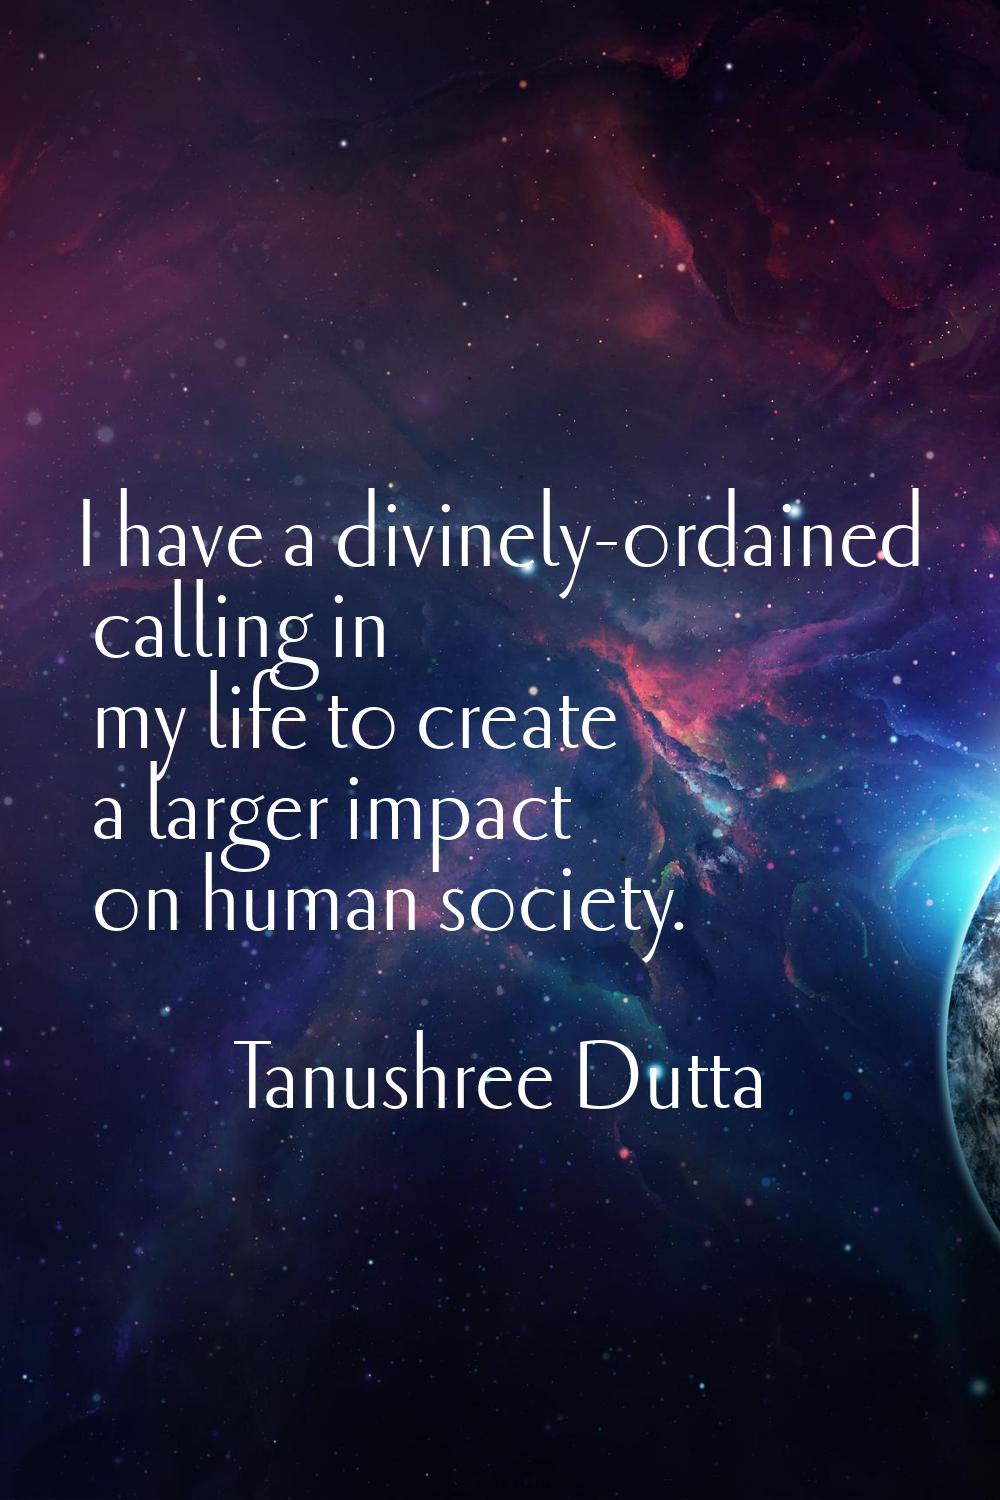 I have a divinely-ordained calling in my life to create a larger impact on human society.